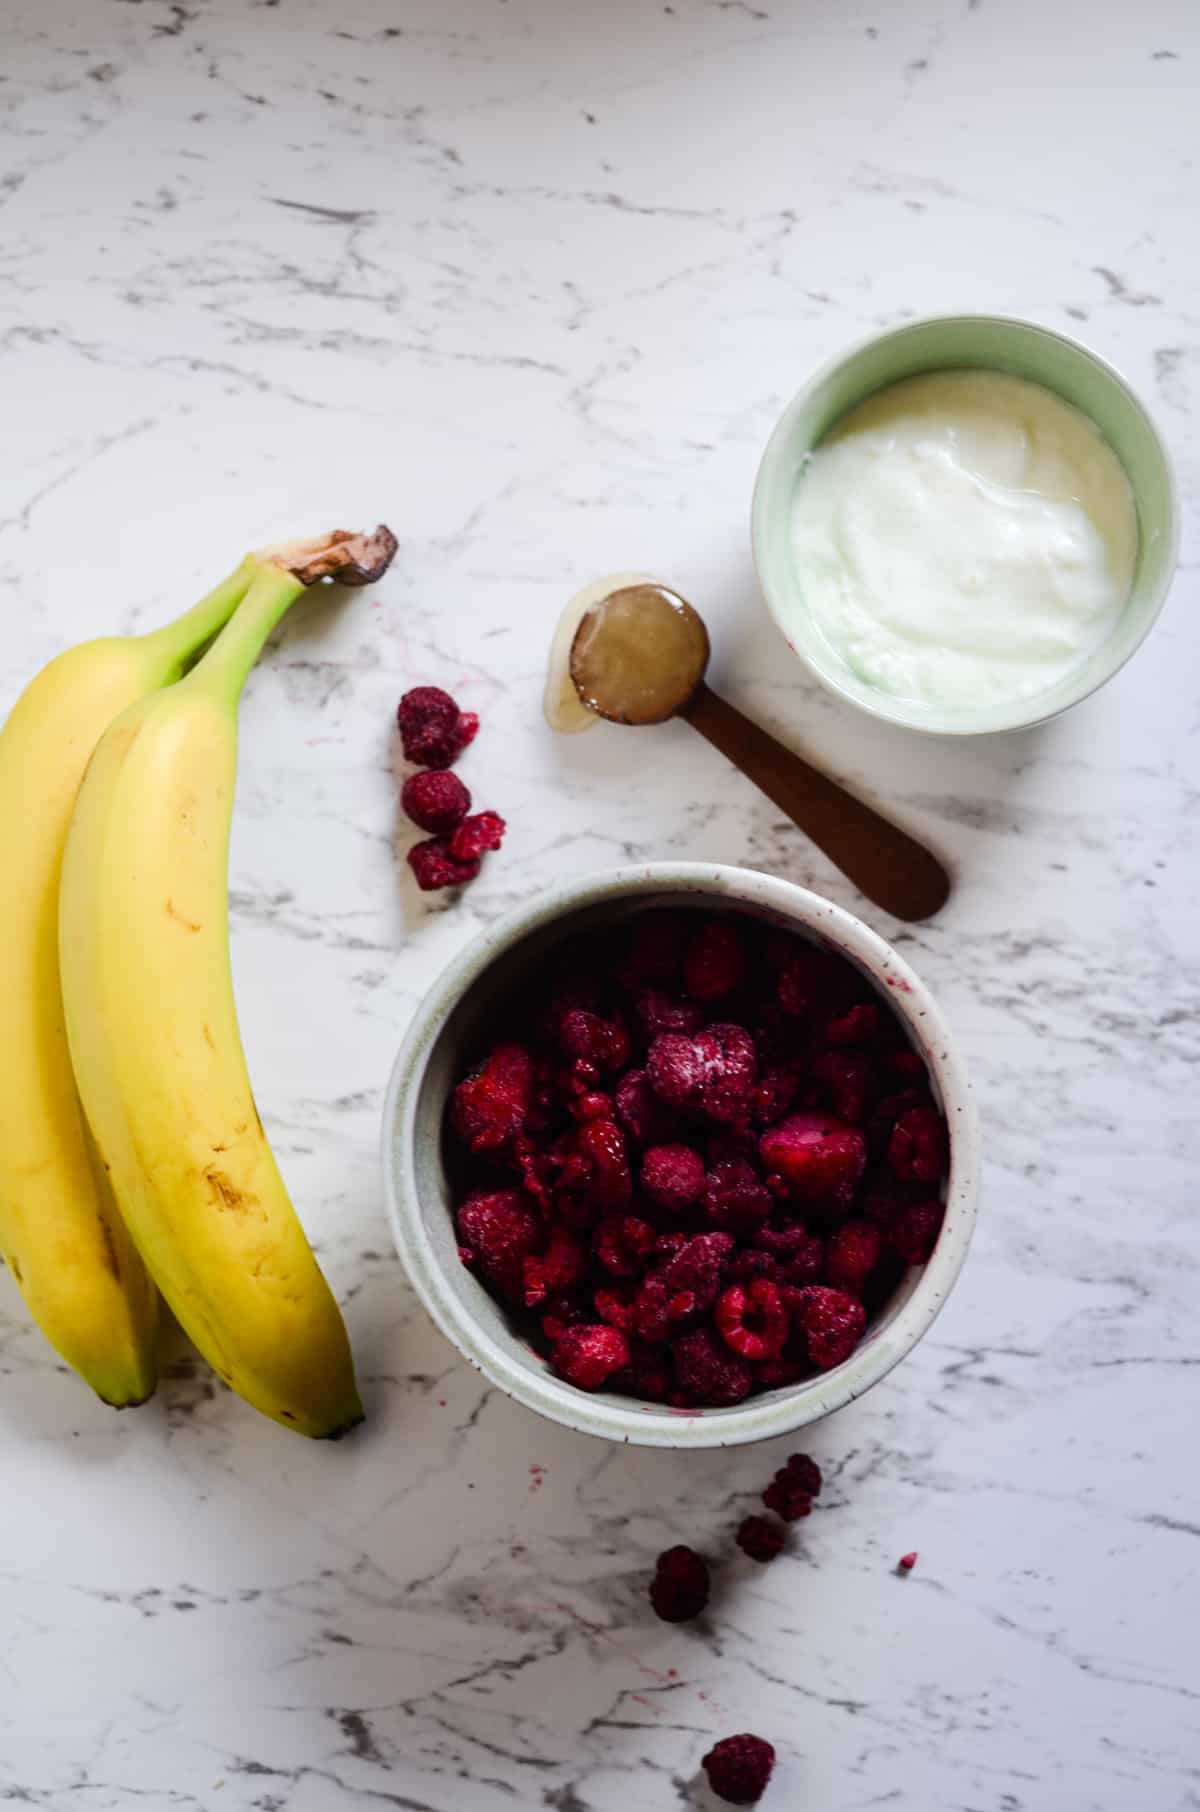 Bananas, frozen raspberries, yogurt, and honey on the counter for a smoothie.